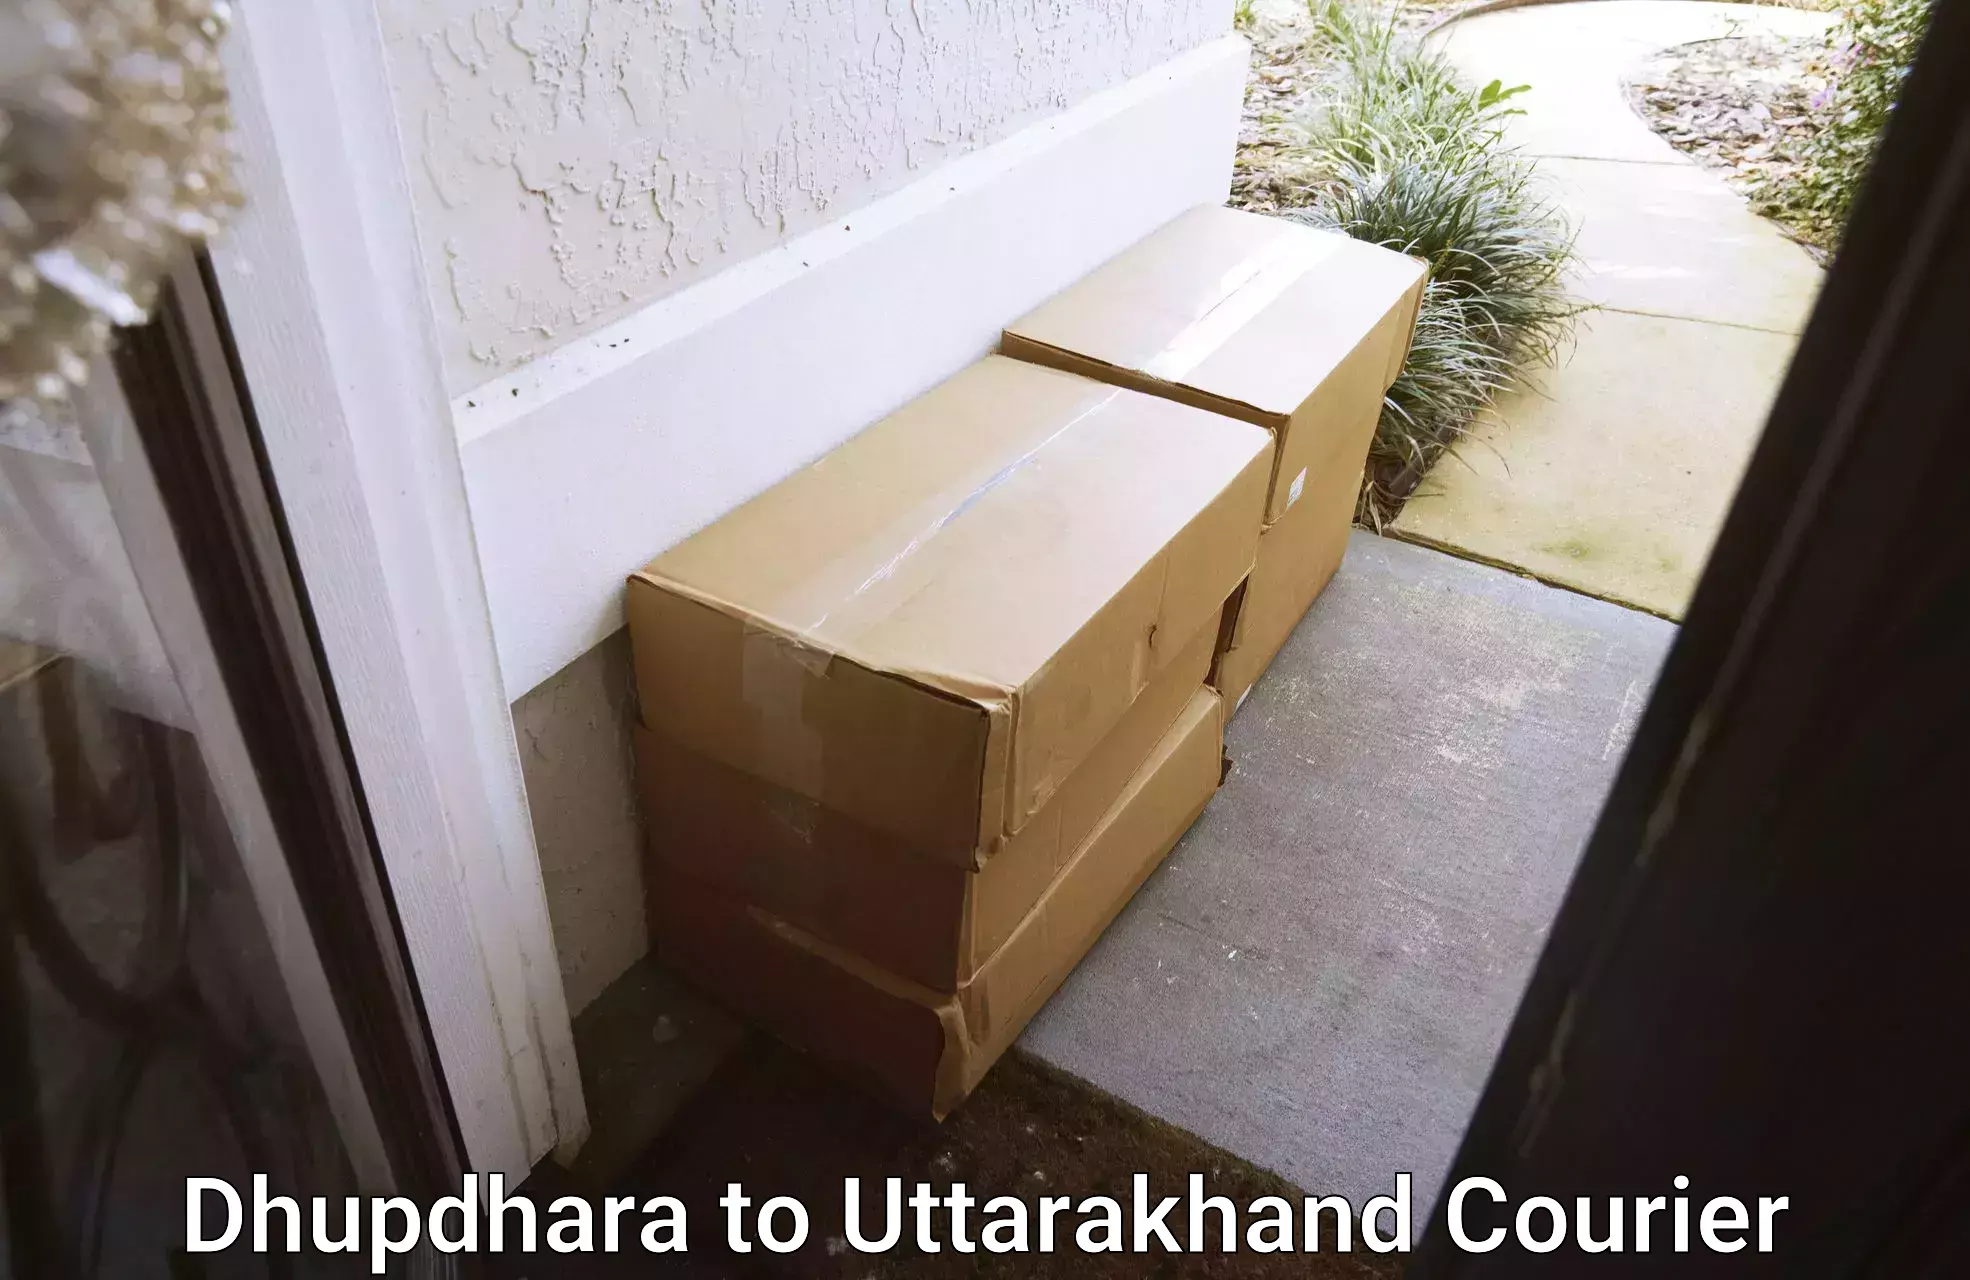 Local delivery service Dhupdhara to Uttarakhand